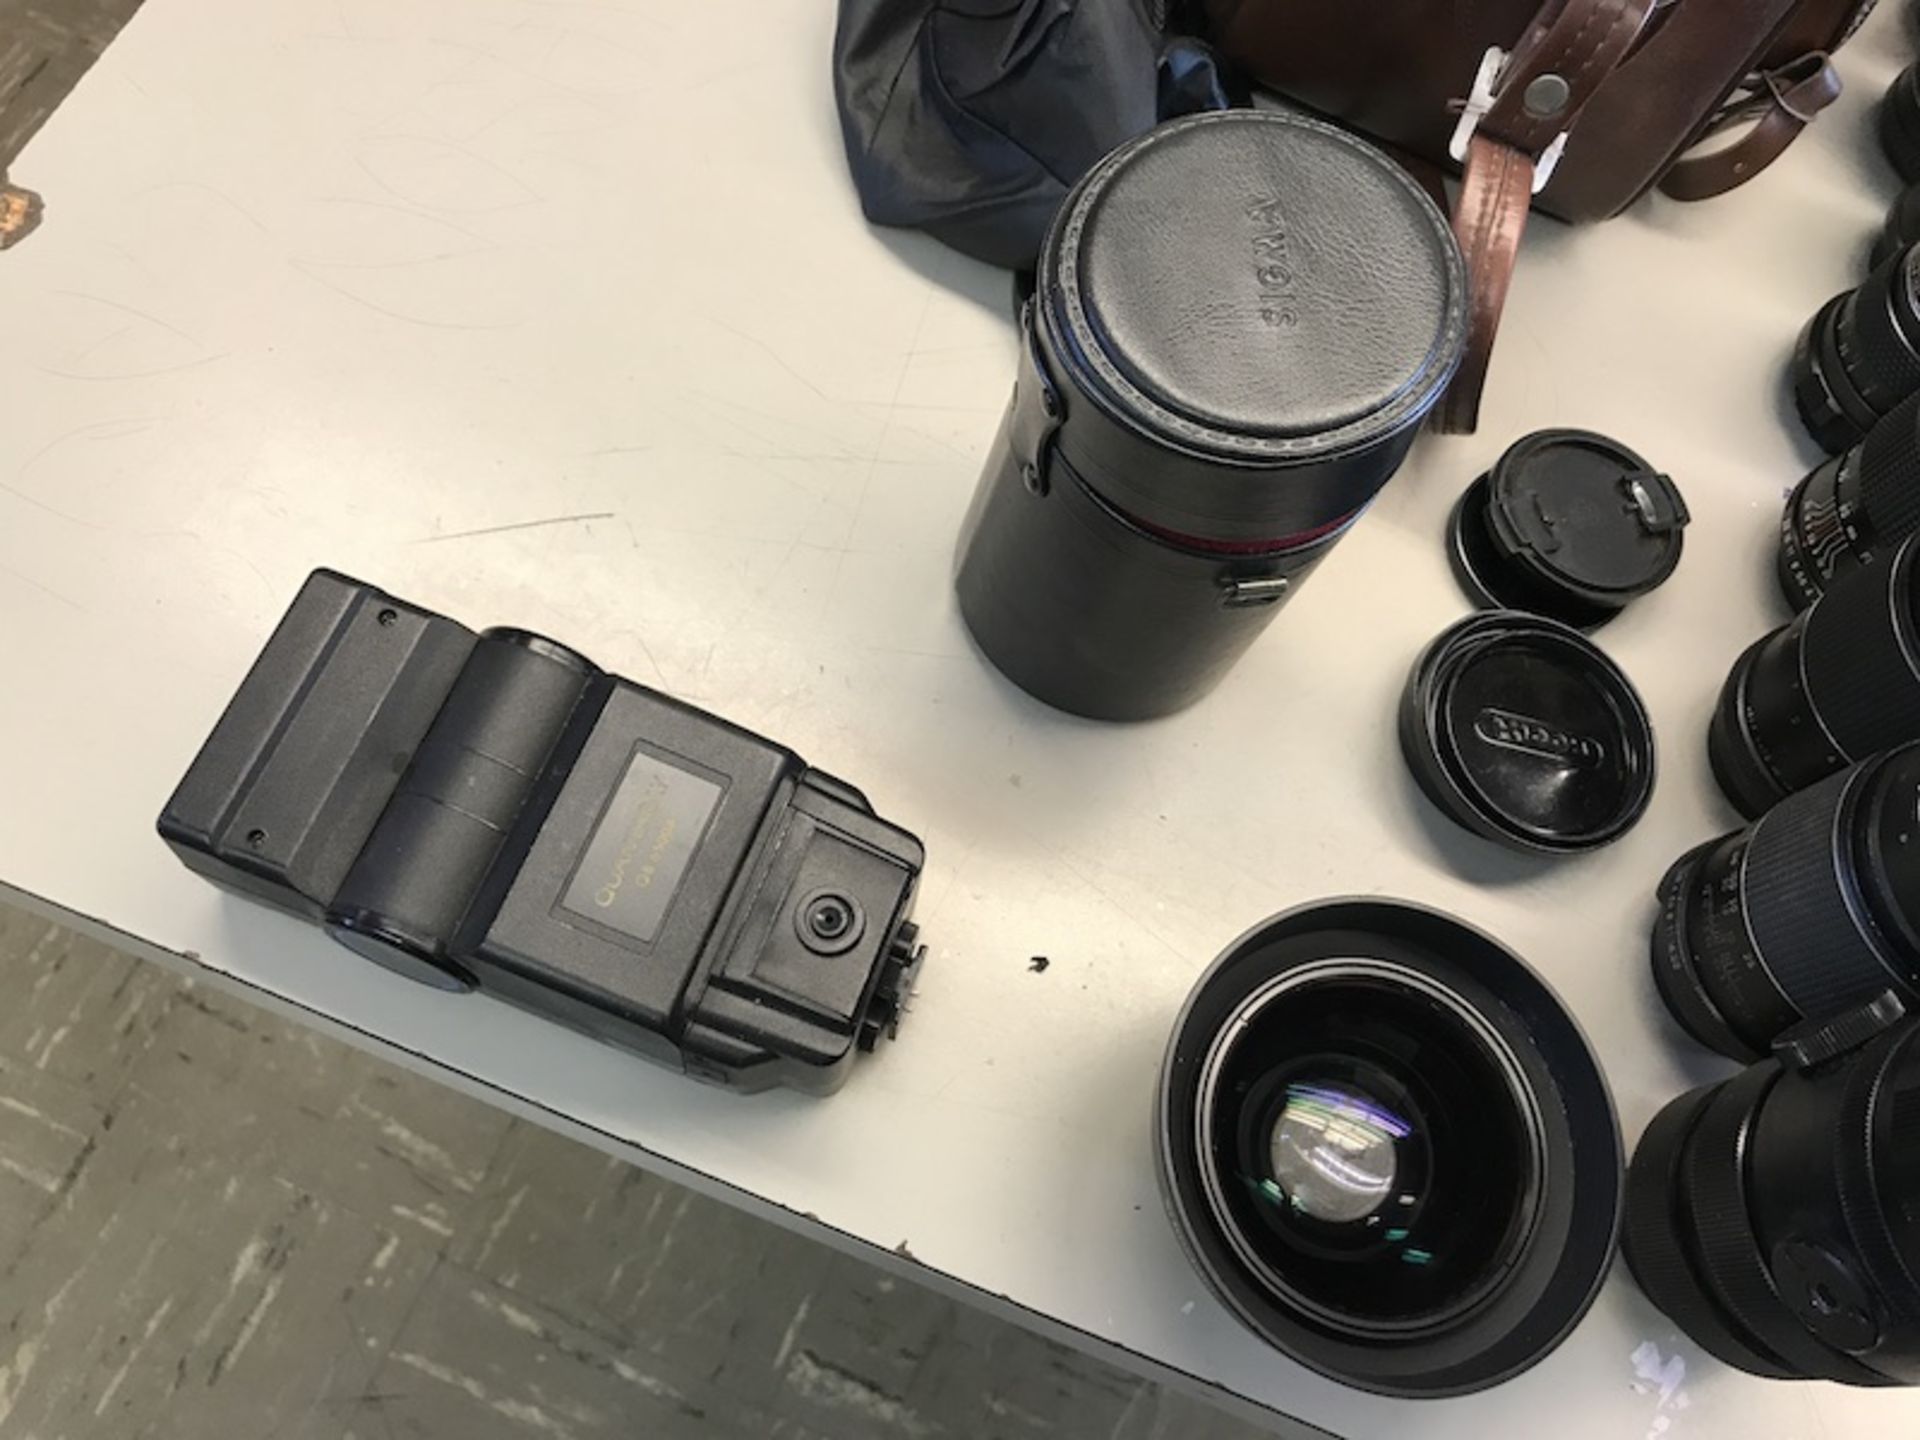 Lot of Misc. Camera Lenses, Flashes, Camera Accessories (Room 108) - Image 7 of 12